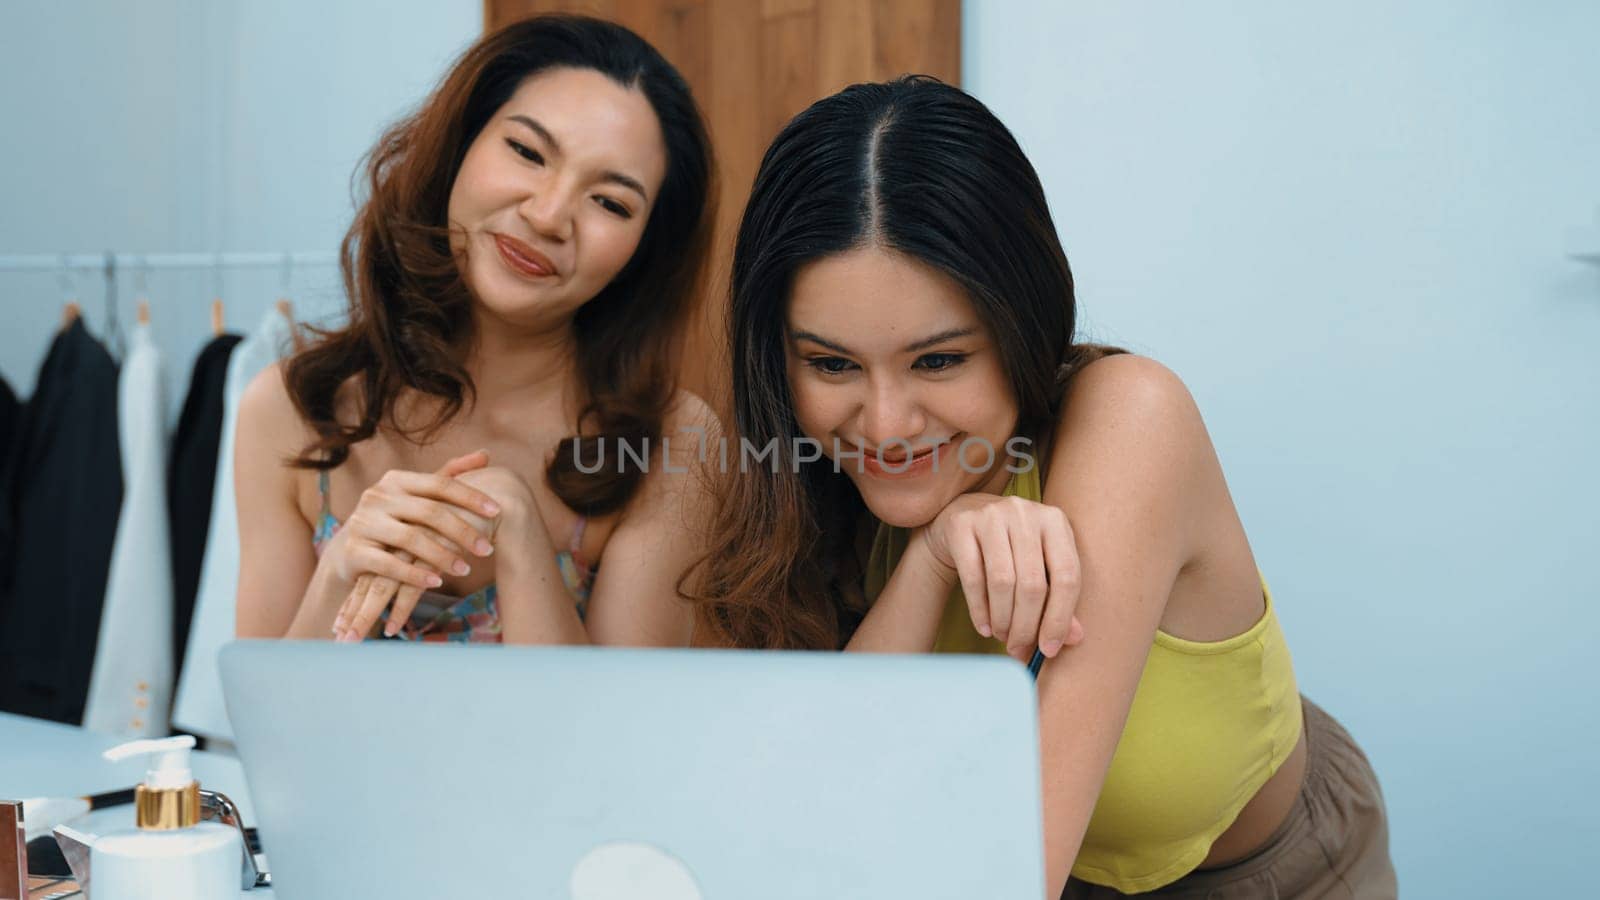 Two influencer partner shoot live streaming vlog video review makeup social media or blog. Happy young girl with vivancy cosmetics studio lighting for marketing recording session broadcasting online.